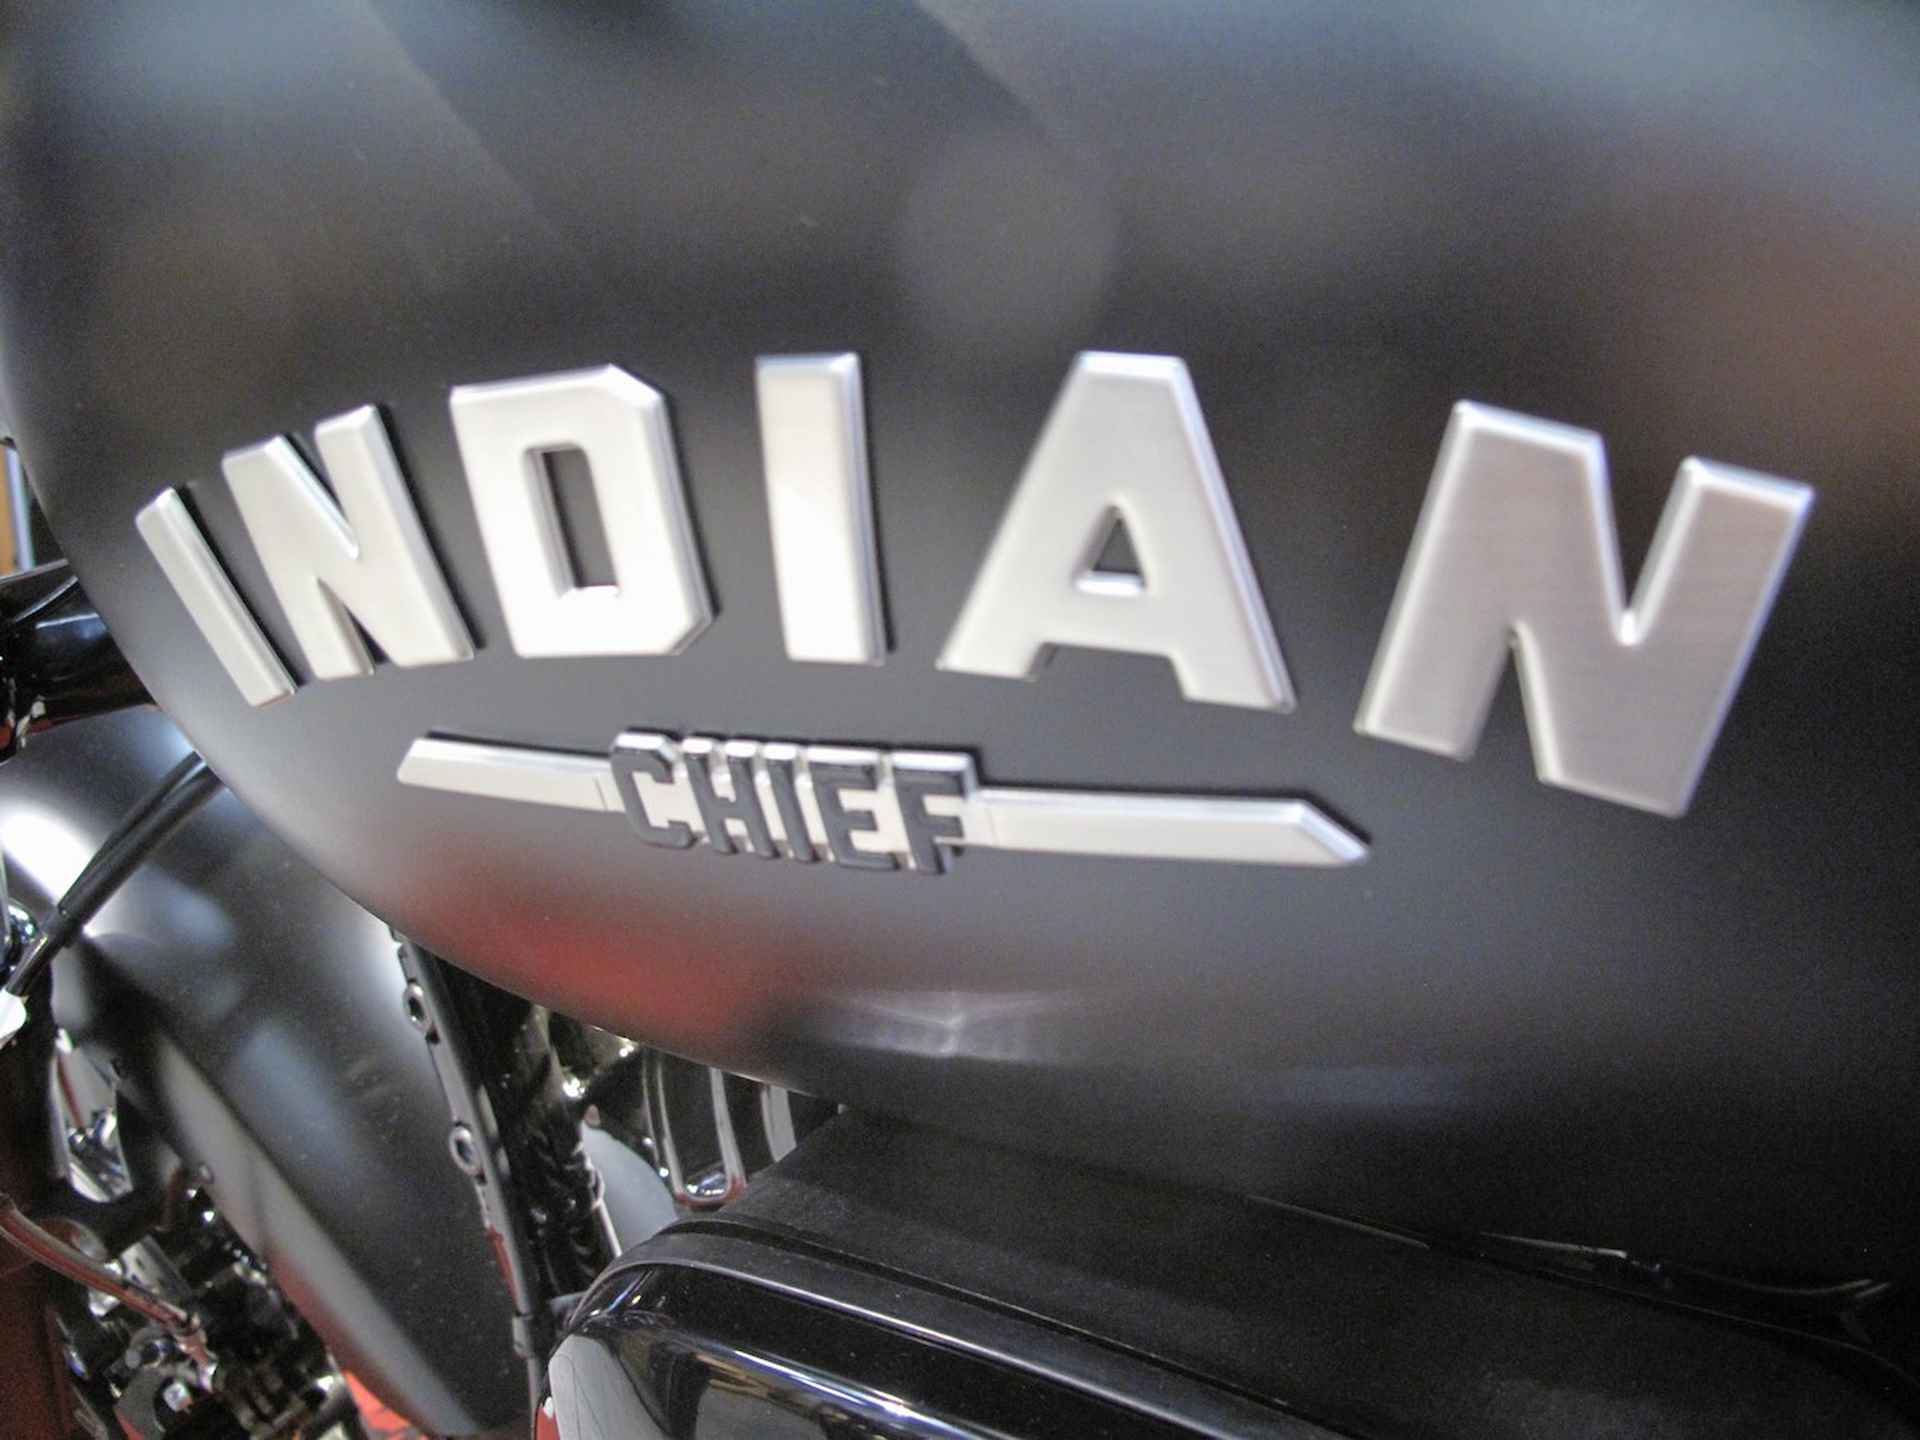 Indian Chief Dark Horse Official Indian Motoercycle Dealer - 8/11